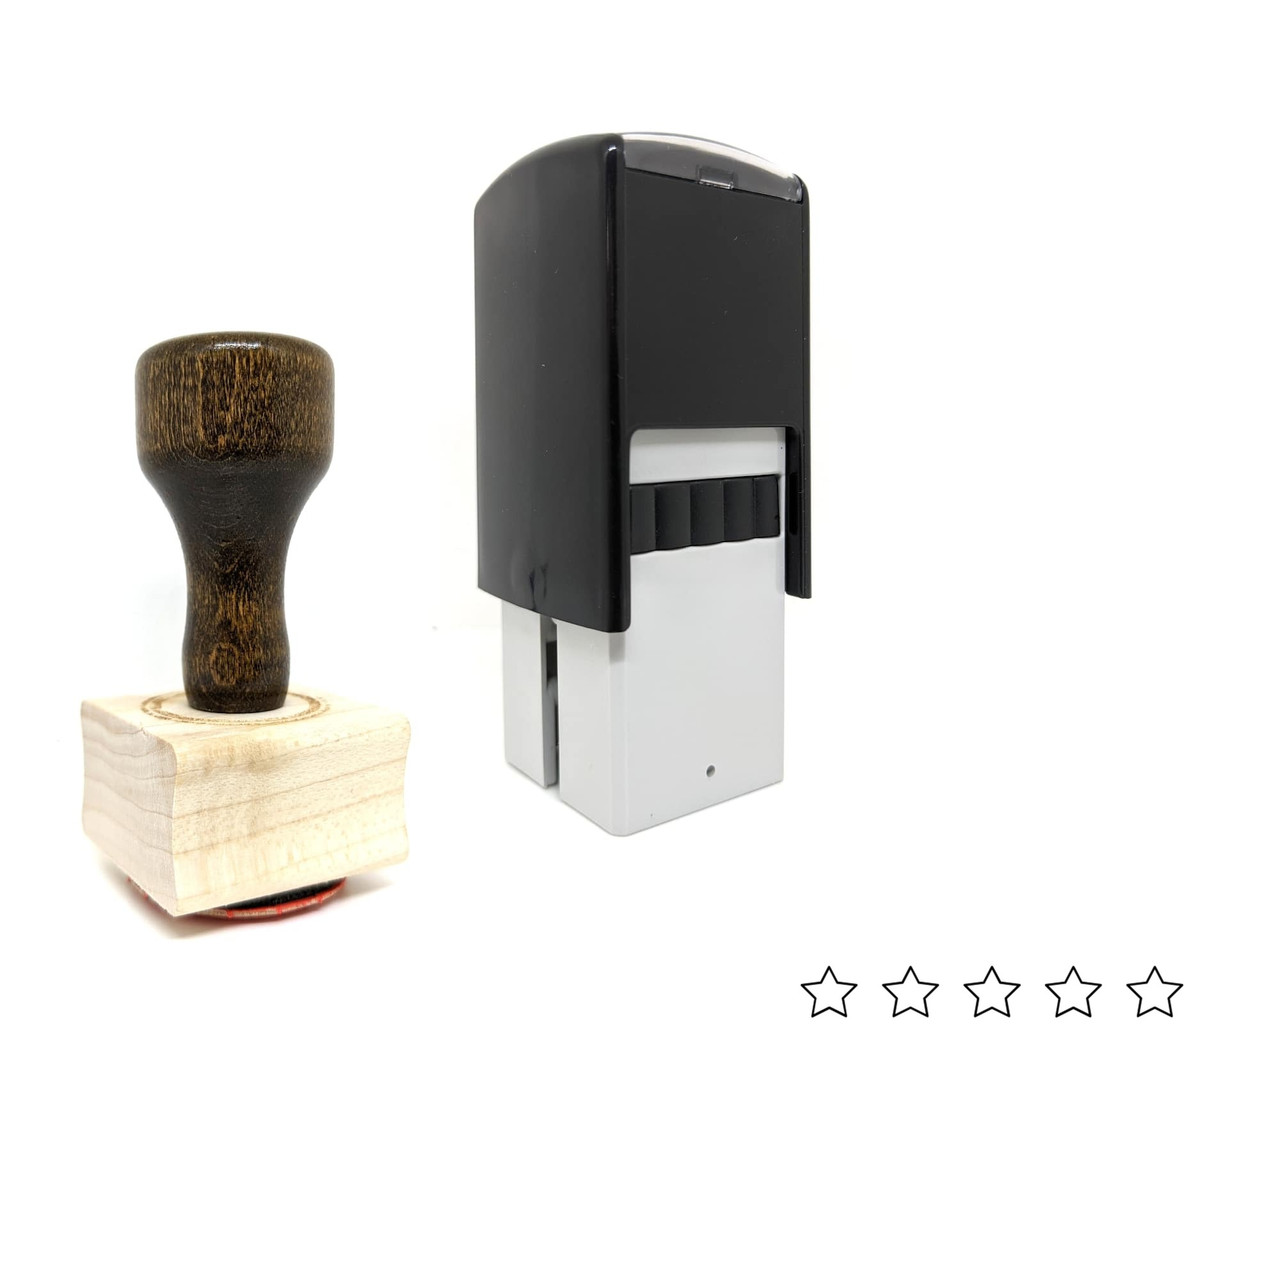 Five Star Rating Rubber Stamp No. 13